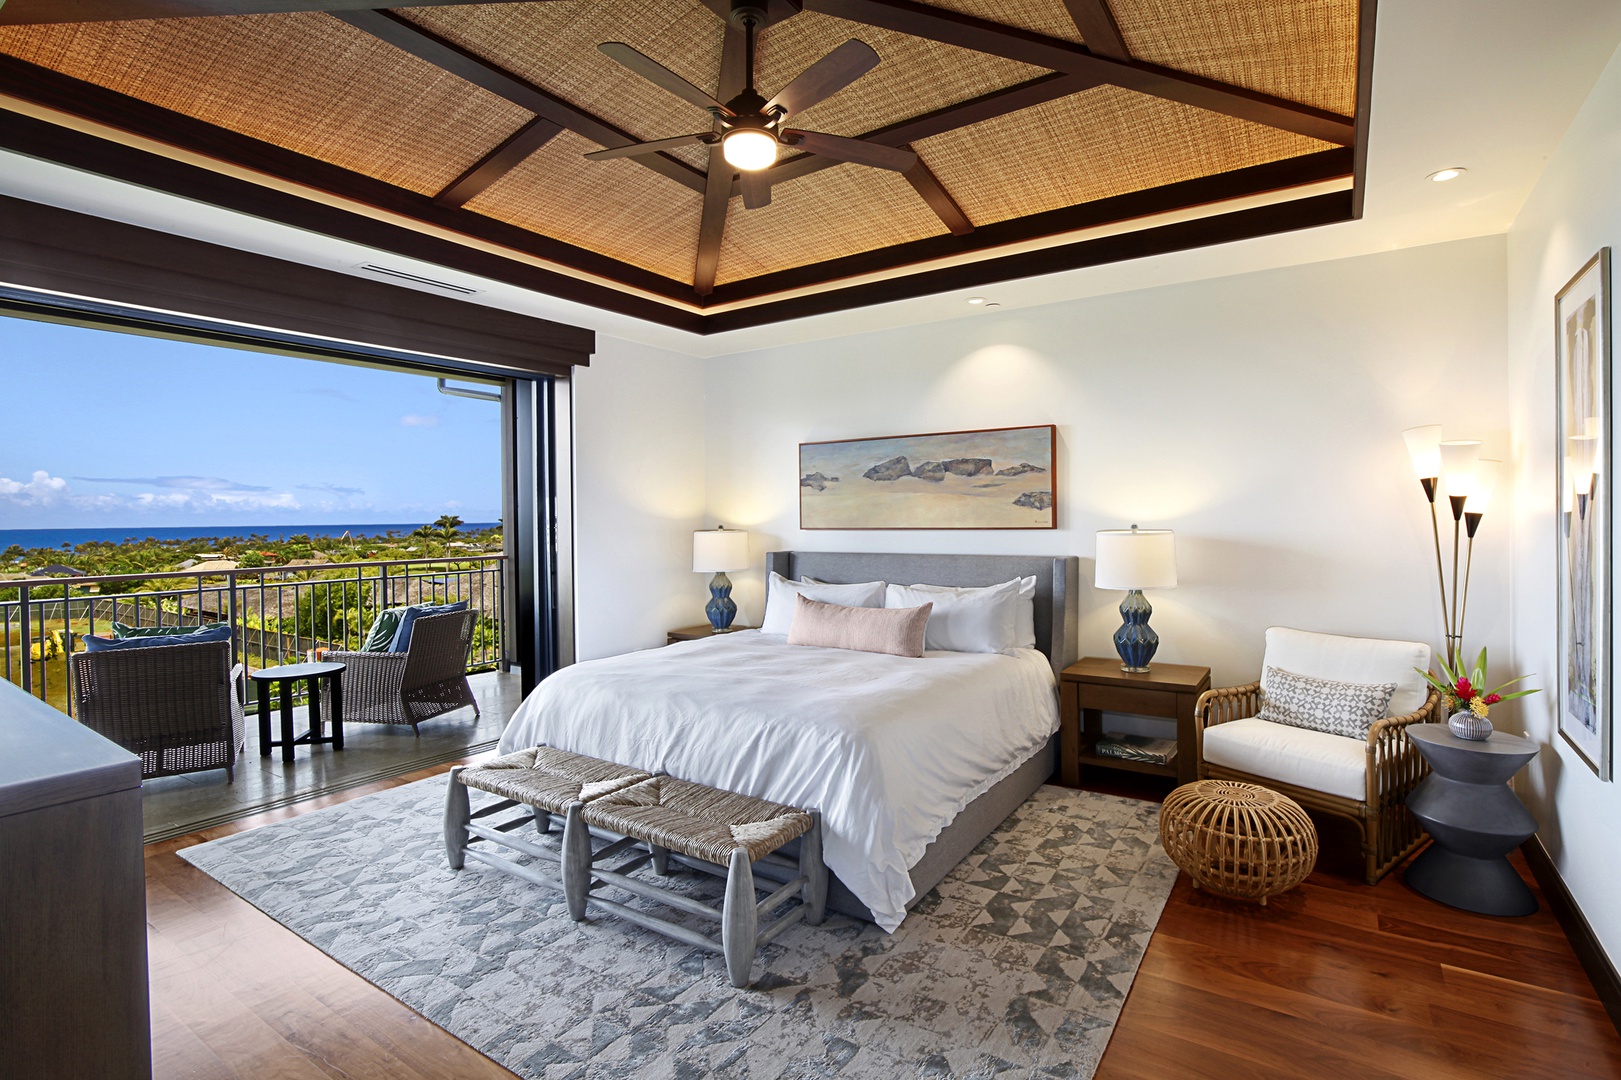 Koloa Vacation Rentals, Kukui'ula Villa #8 - Primary bedroom offers a king bed and Ocean View